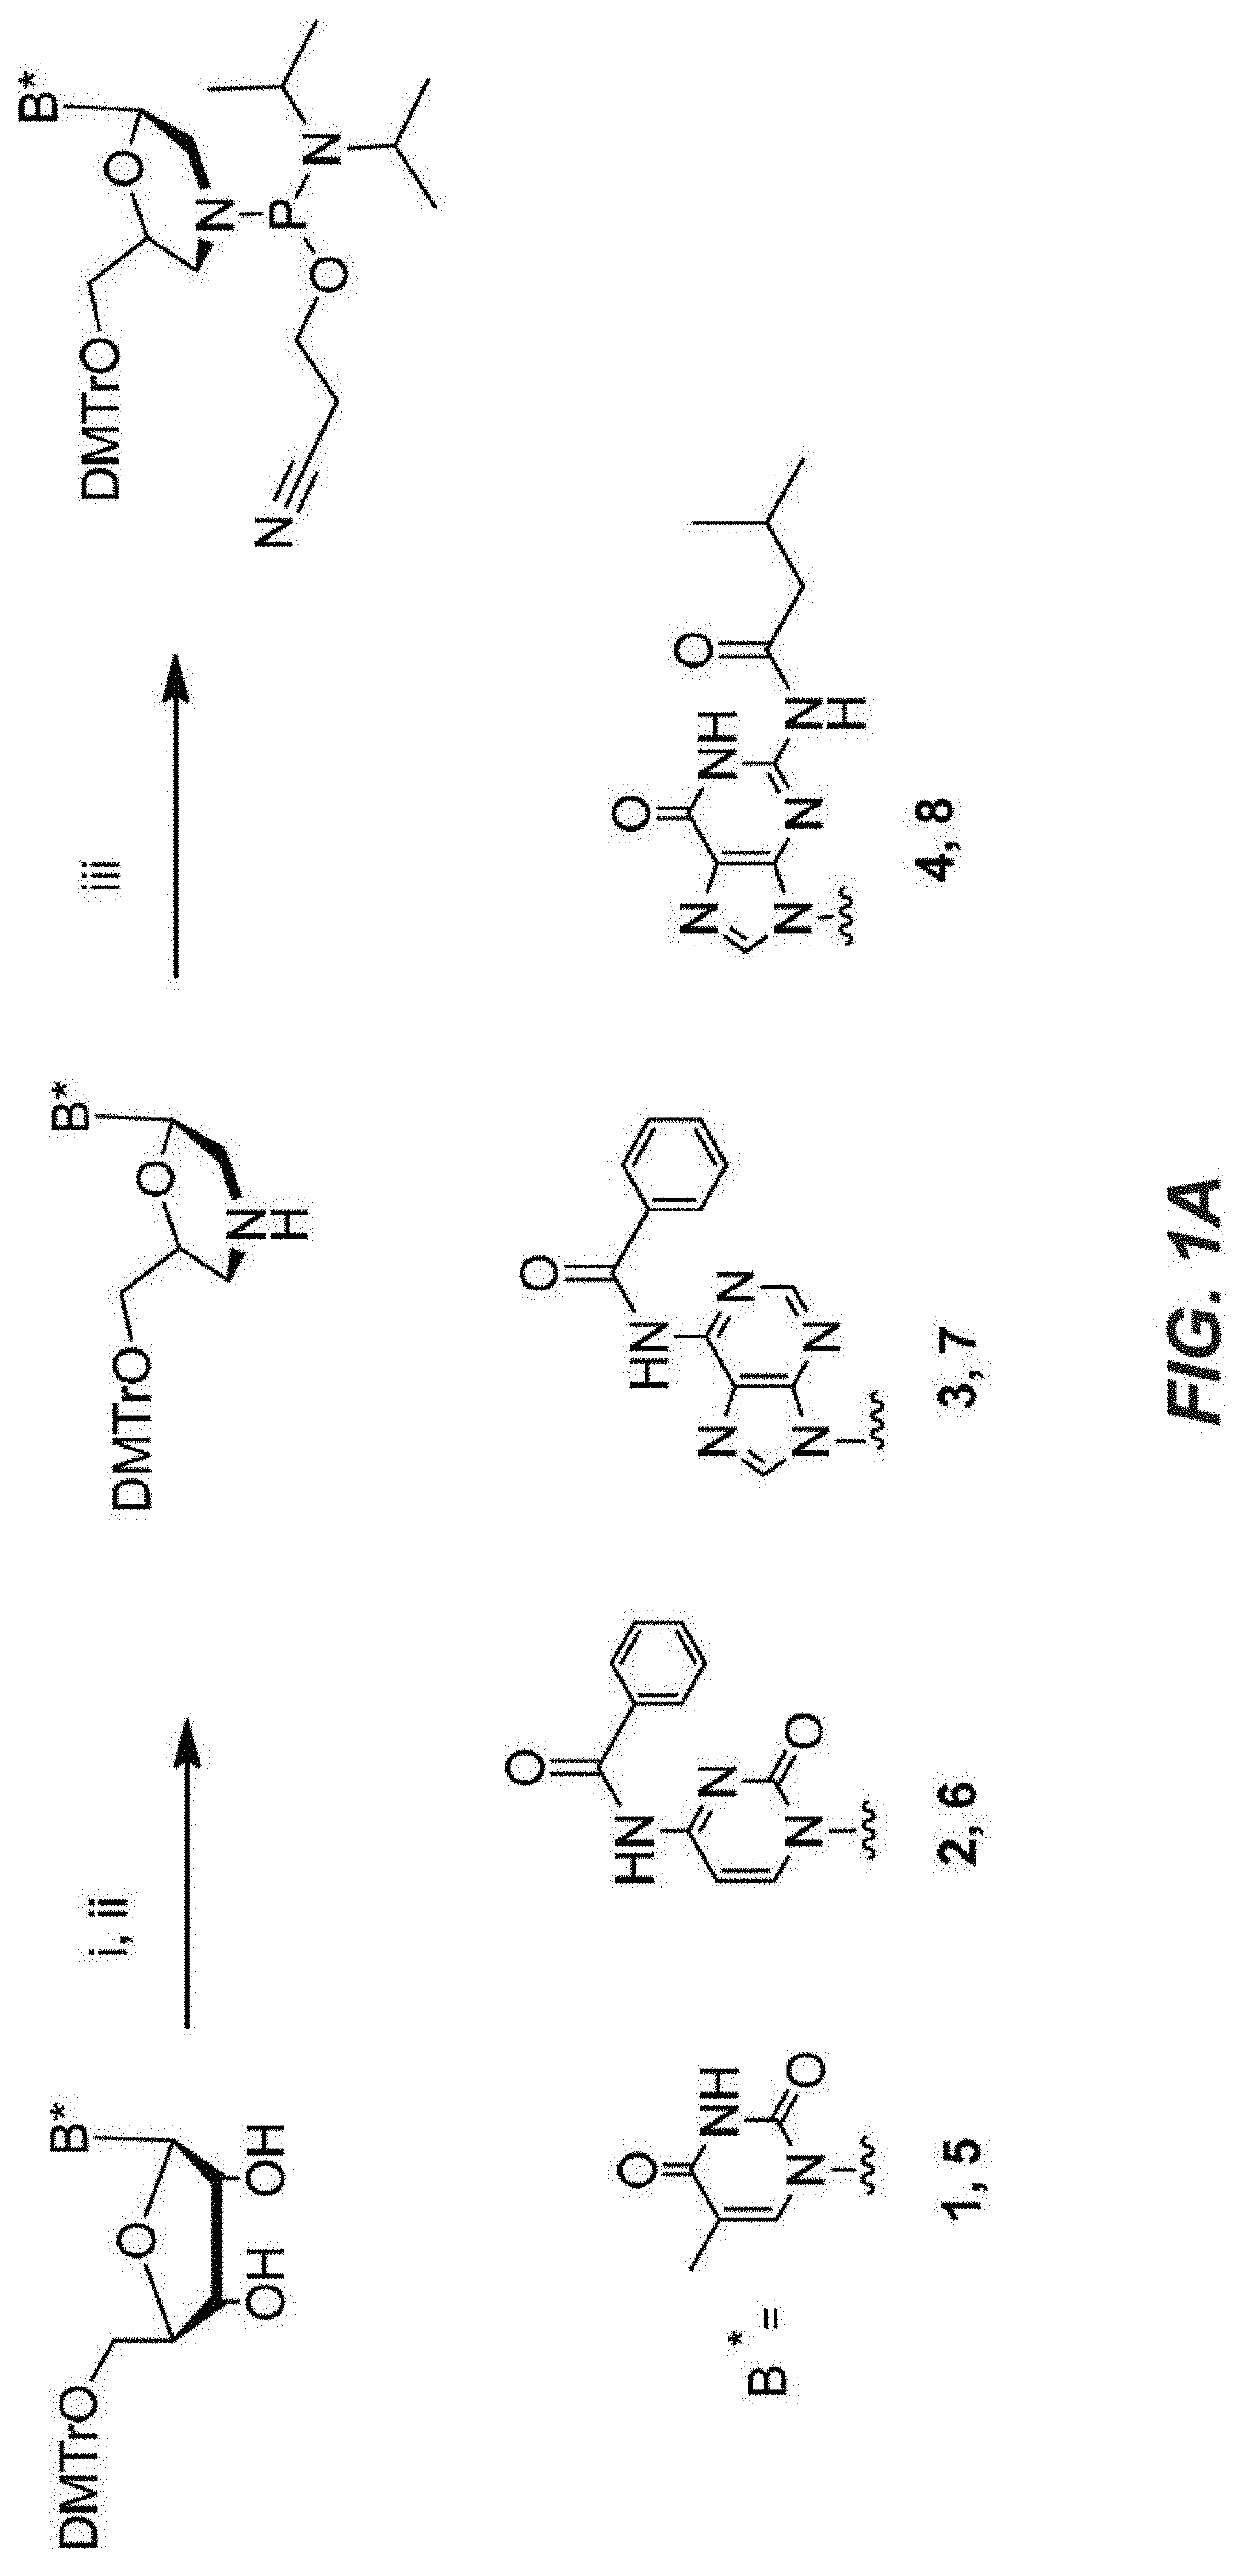 Thiomorpholino Oligonucleotides For The Treatment of Muscular Dystrophy